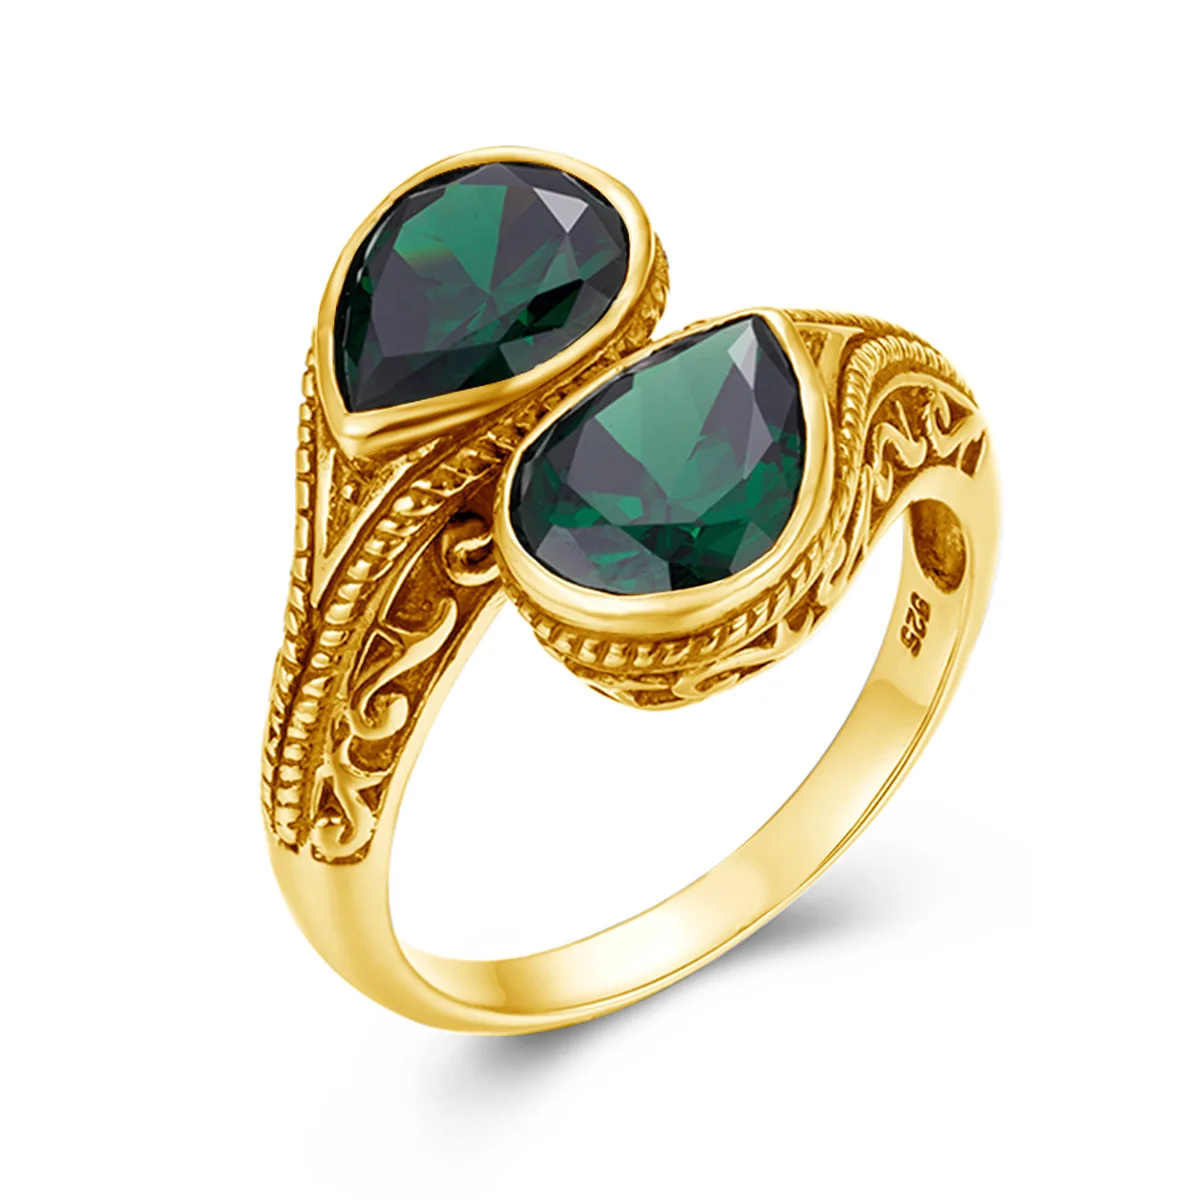 

Antique Gothic Jewelry Christmas Holiday 925 Sterling Silver 18K Gold Plated Emerald God's Eye Rings For Women Gift